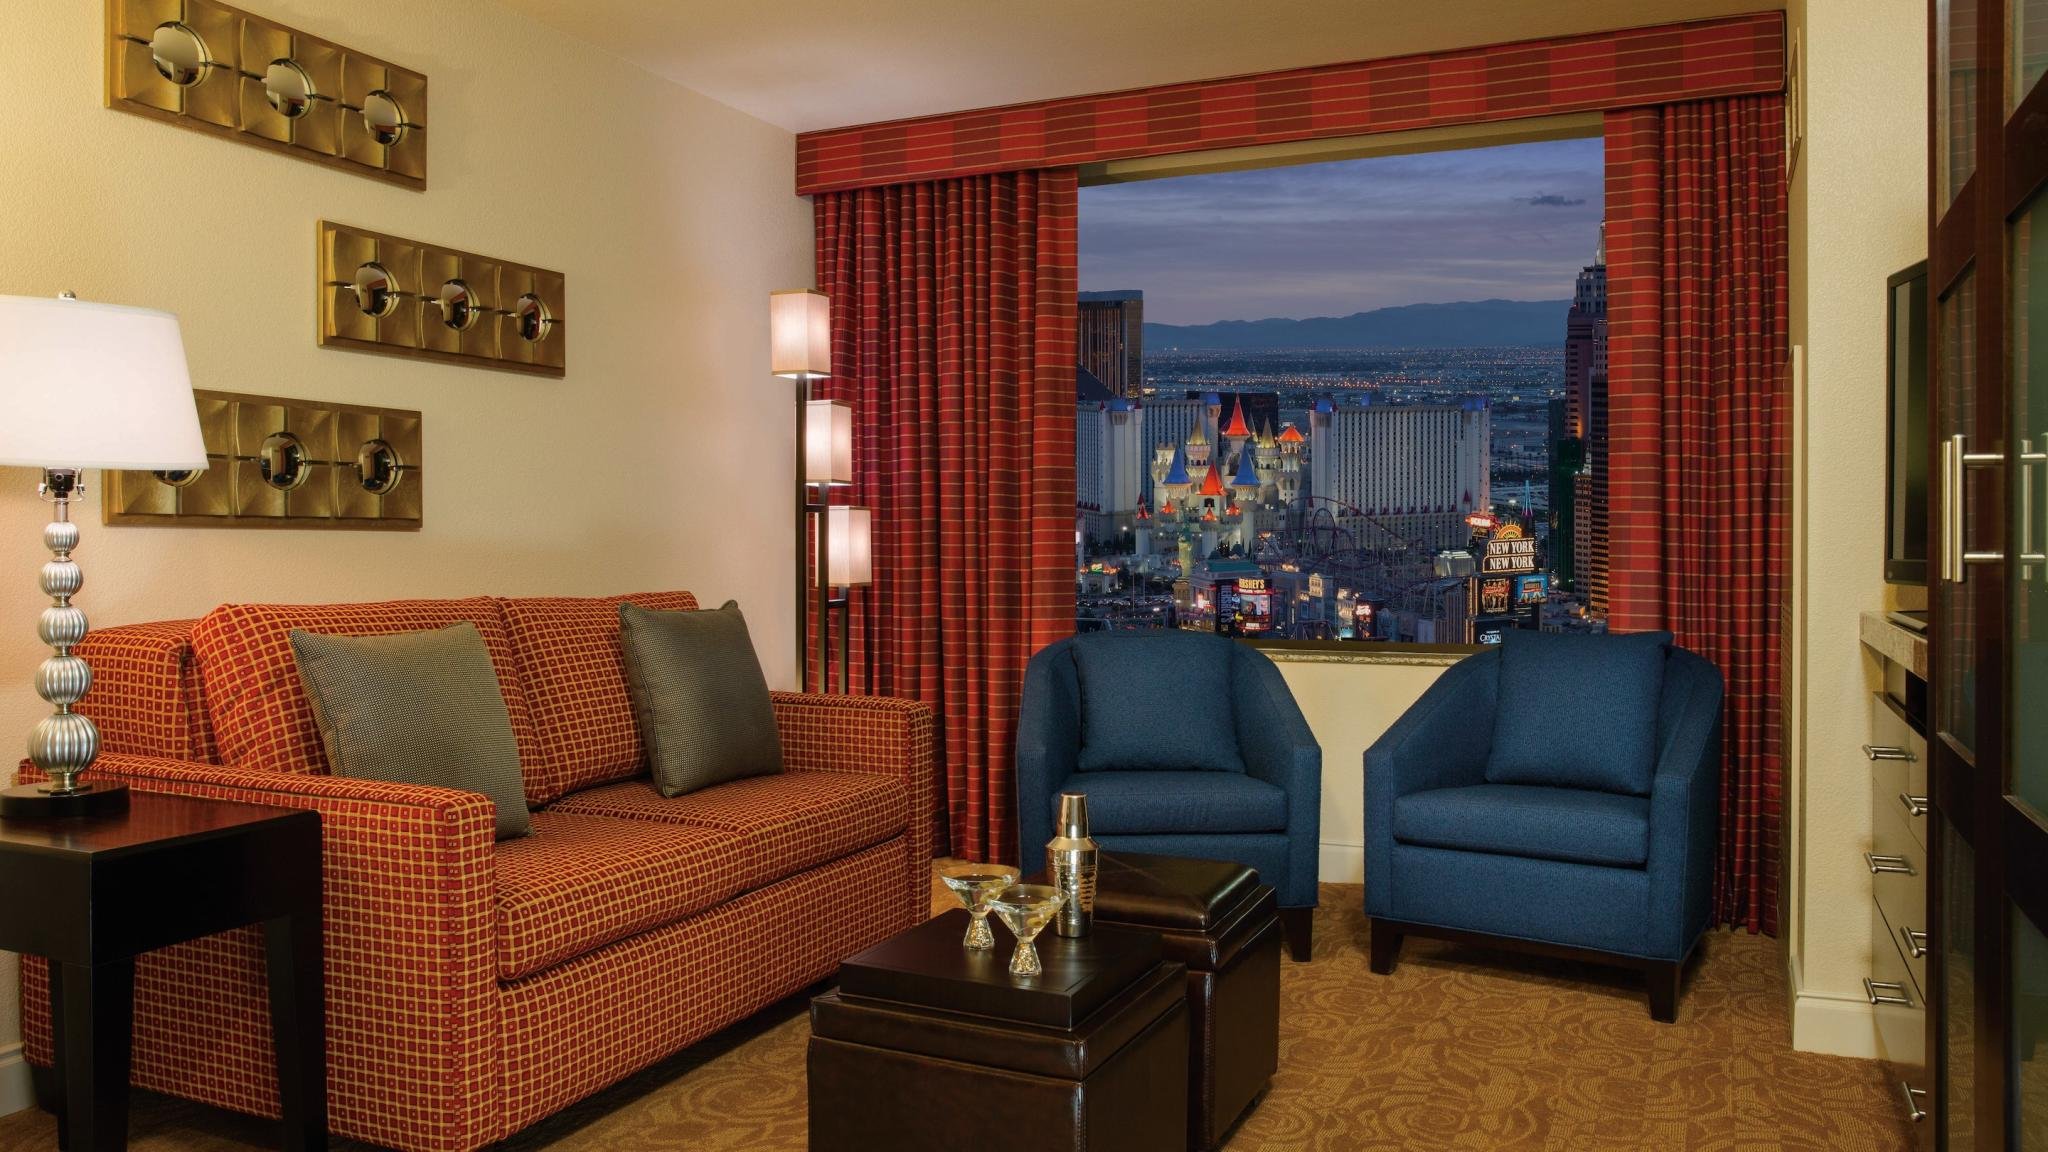 Marriott's Grand Chateau Hotel Review, Las Vegas, United States